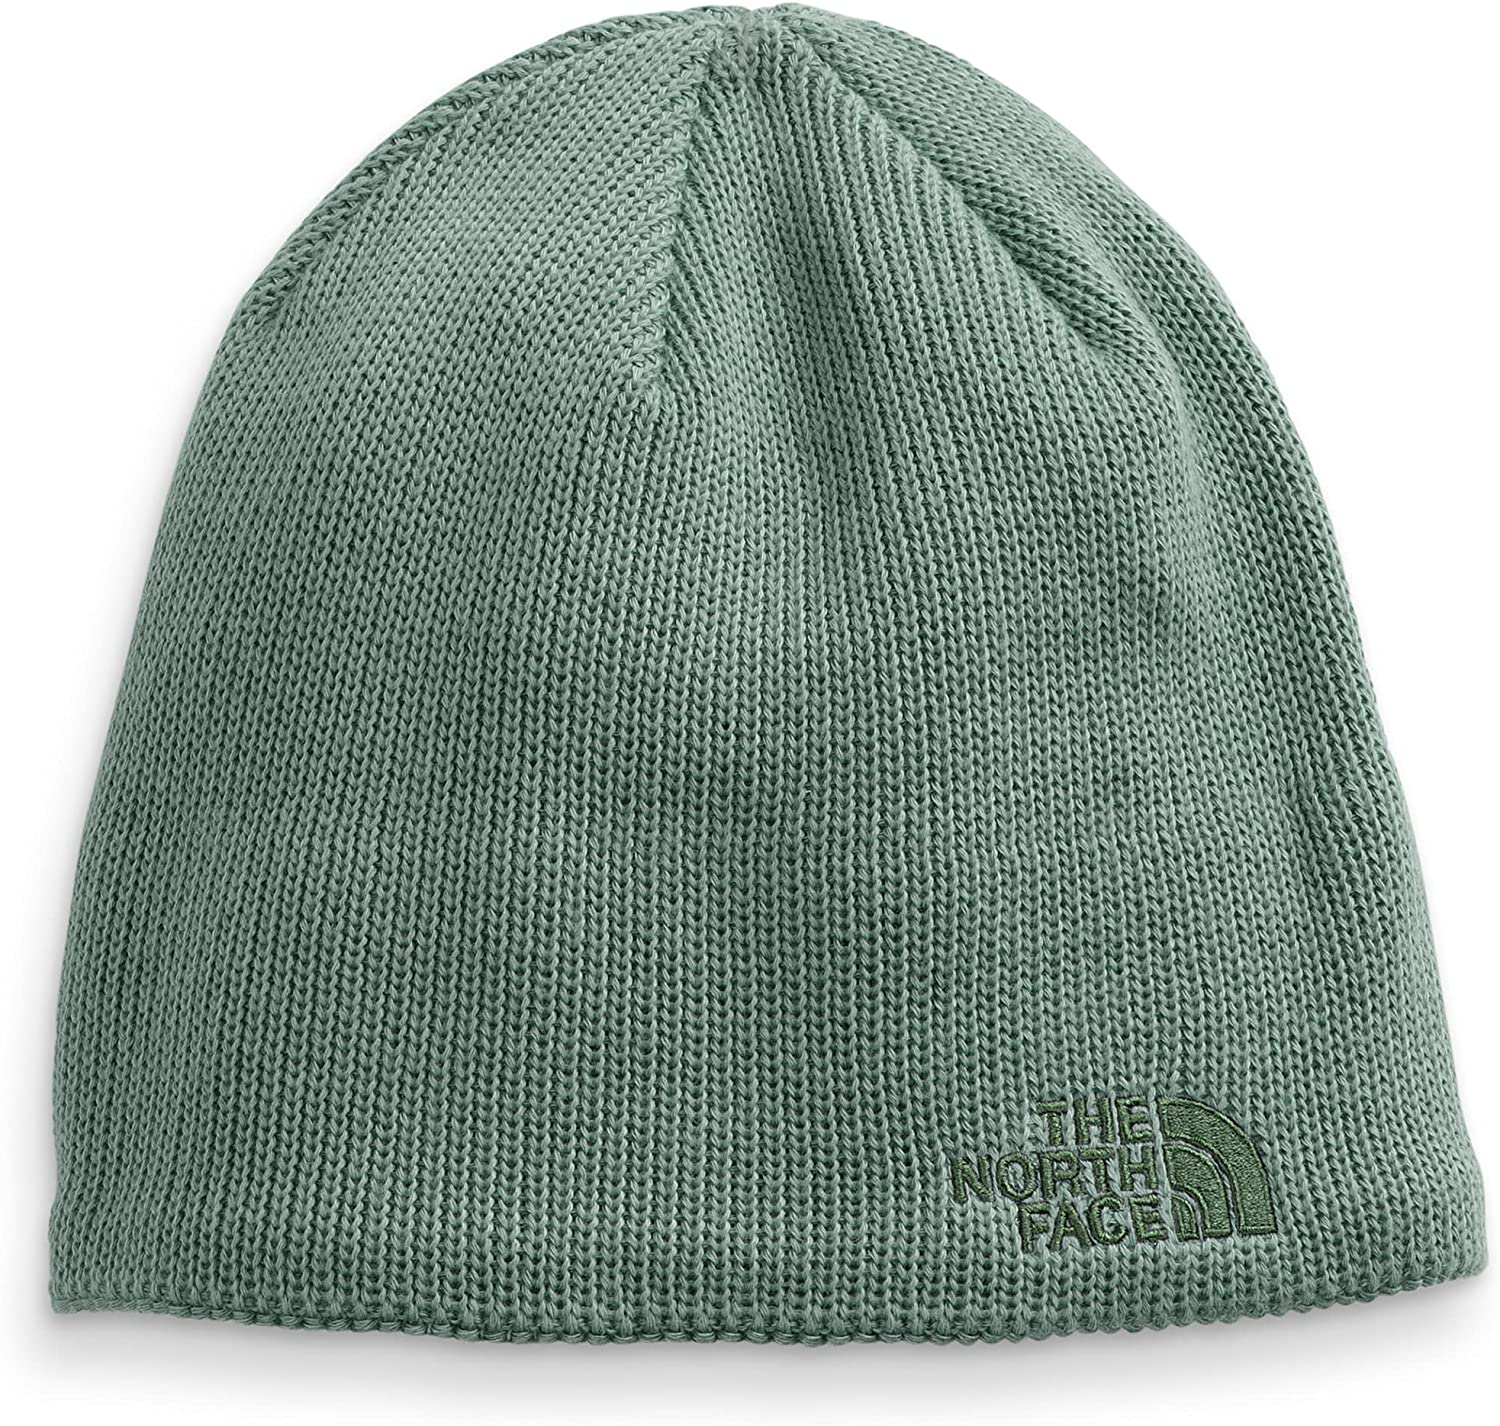 The North Face Bones Recycled Laurel Wreath Green Beanie